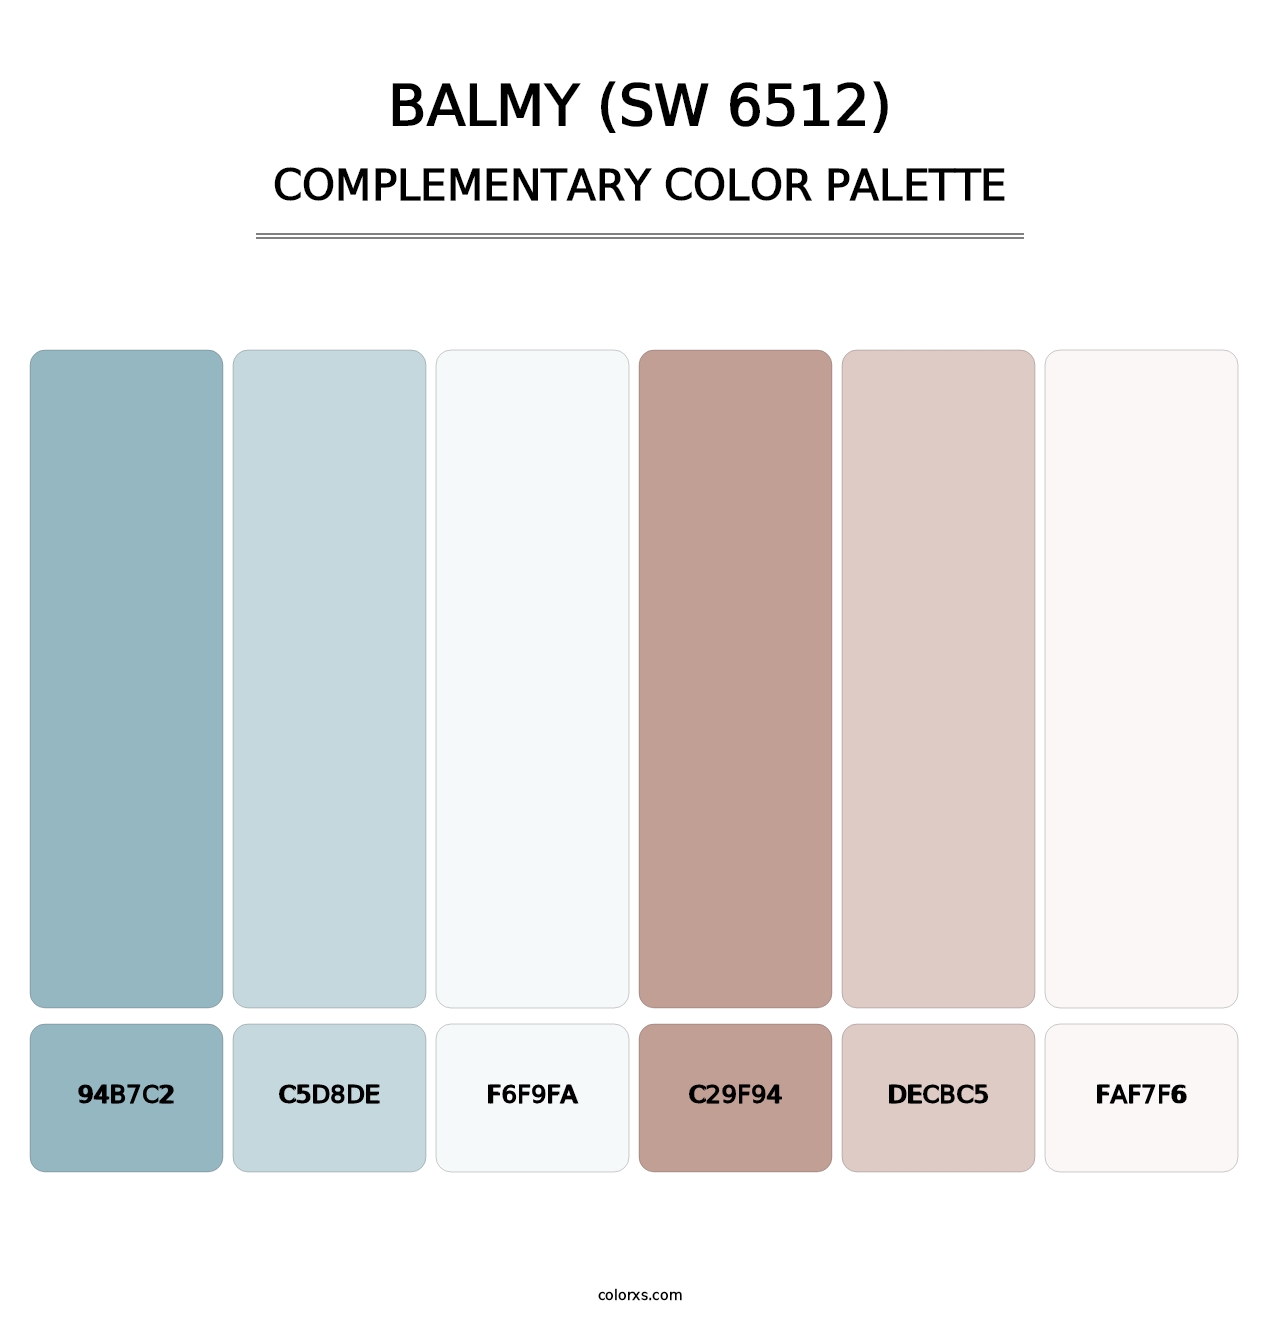 Balmy (SW 6512) - Complementary Color Palette